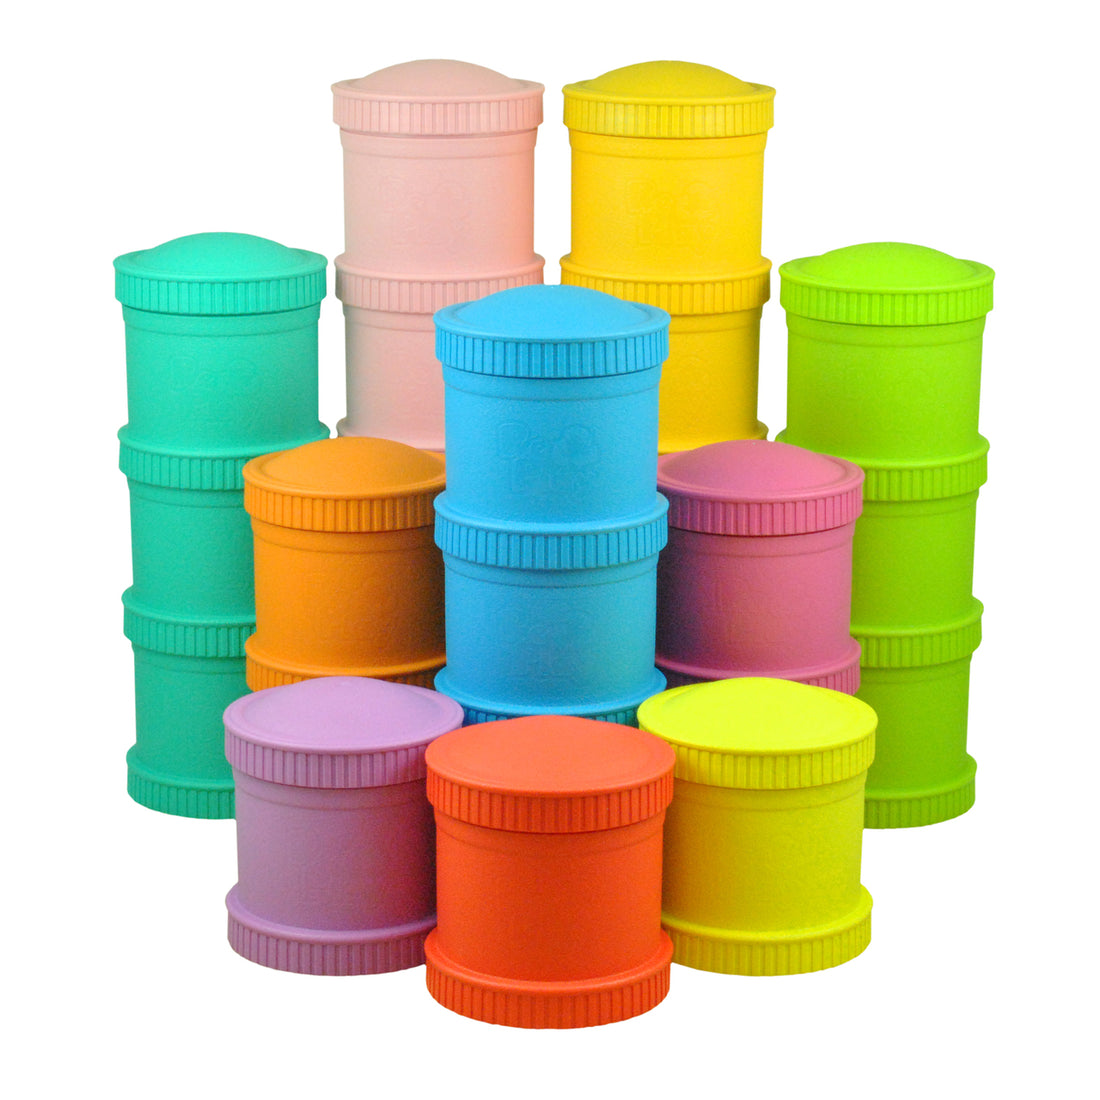 RePlay Snack Stack Base and Lids